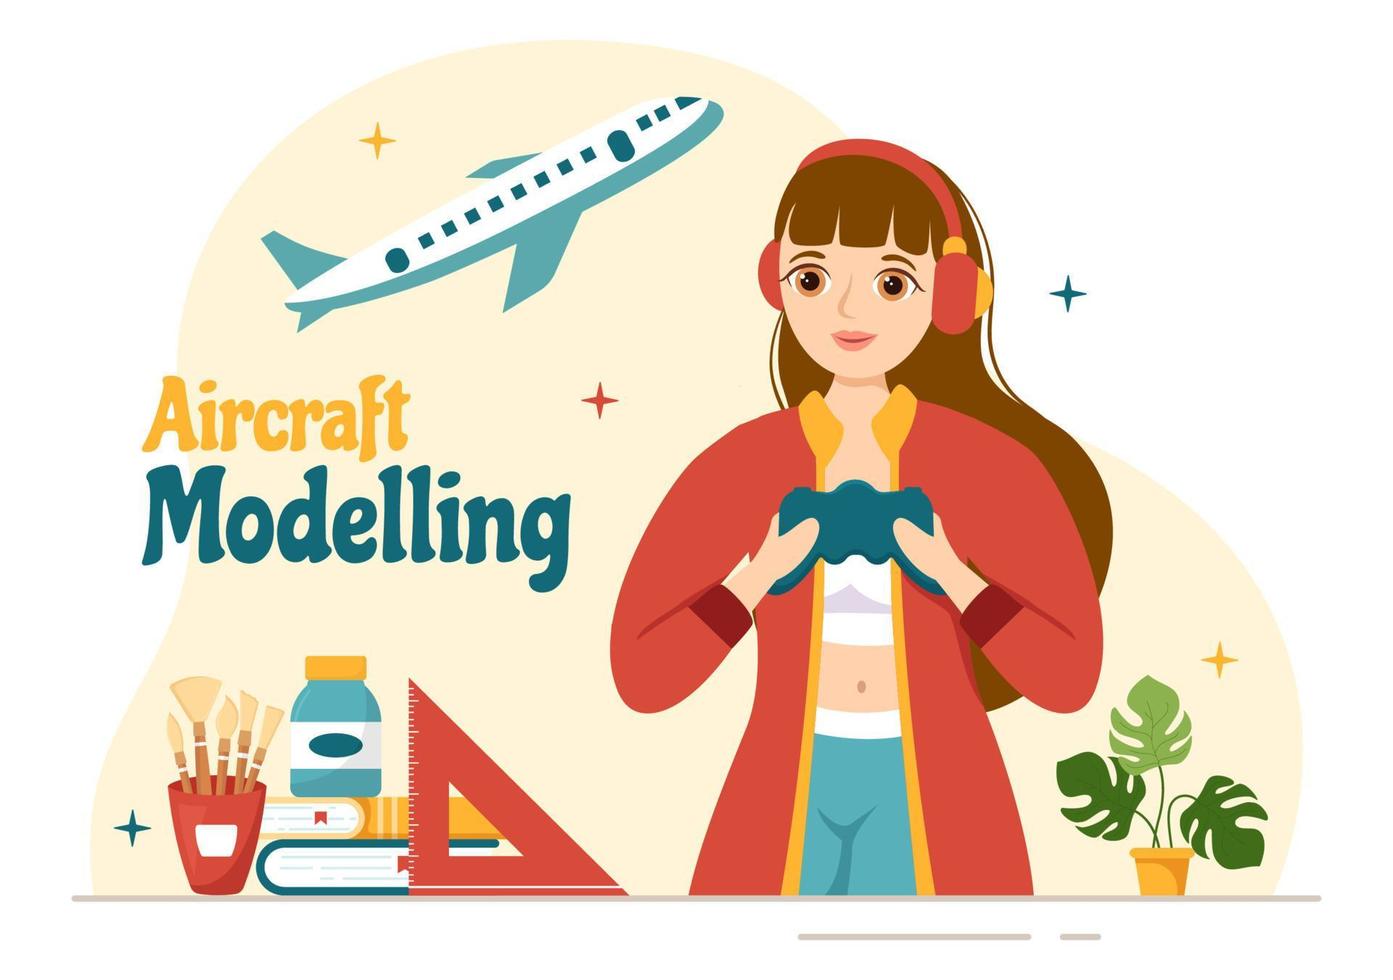 Aircraft Modelling and Crafting Illustration with Assembling or Painting Huge Airplane Model in Flat Cartoon Hand Drawn Landing Page Templates vector